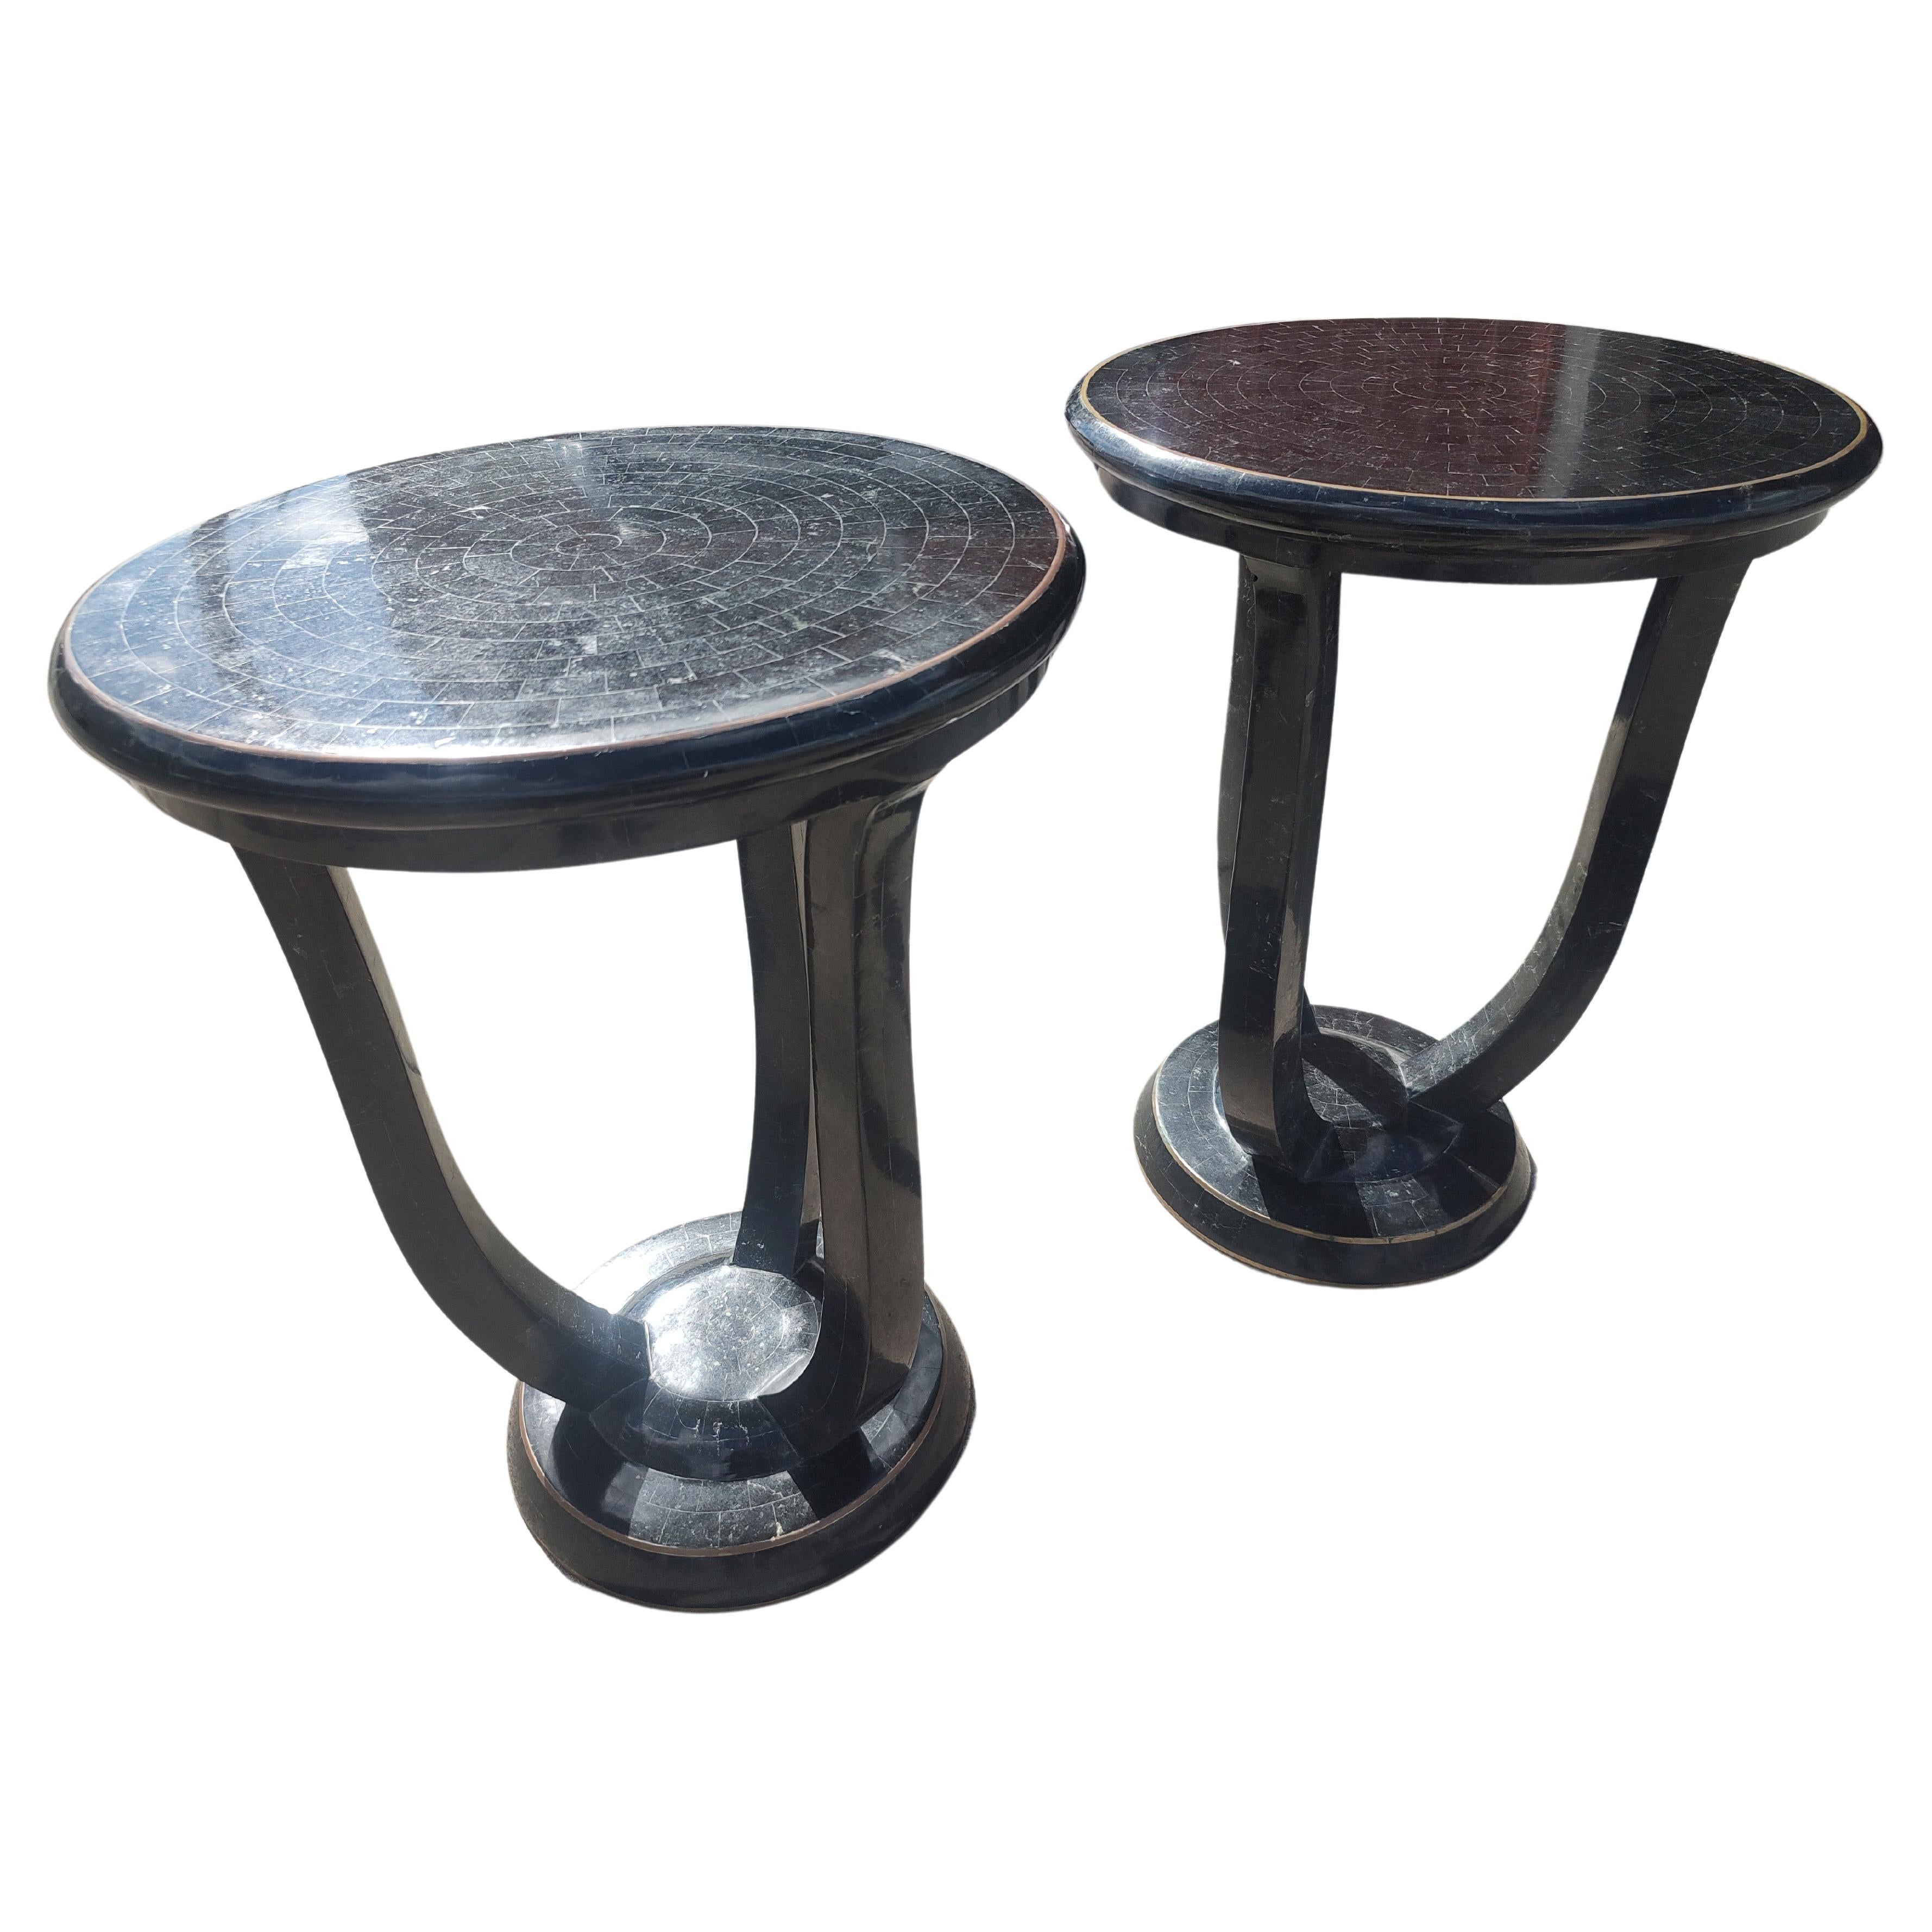 Fantastic pair of Tessellated Stone marble in Black completely encompassing the entire table, base legs and the top. Expertly crafted and meticulously placed fitting exactly as planned. Bronze rings on base and top give a soft tone contrasting with